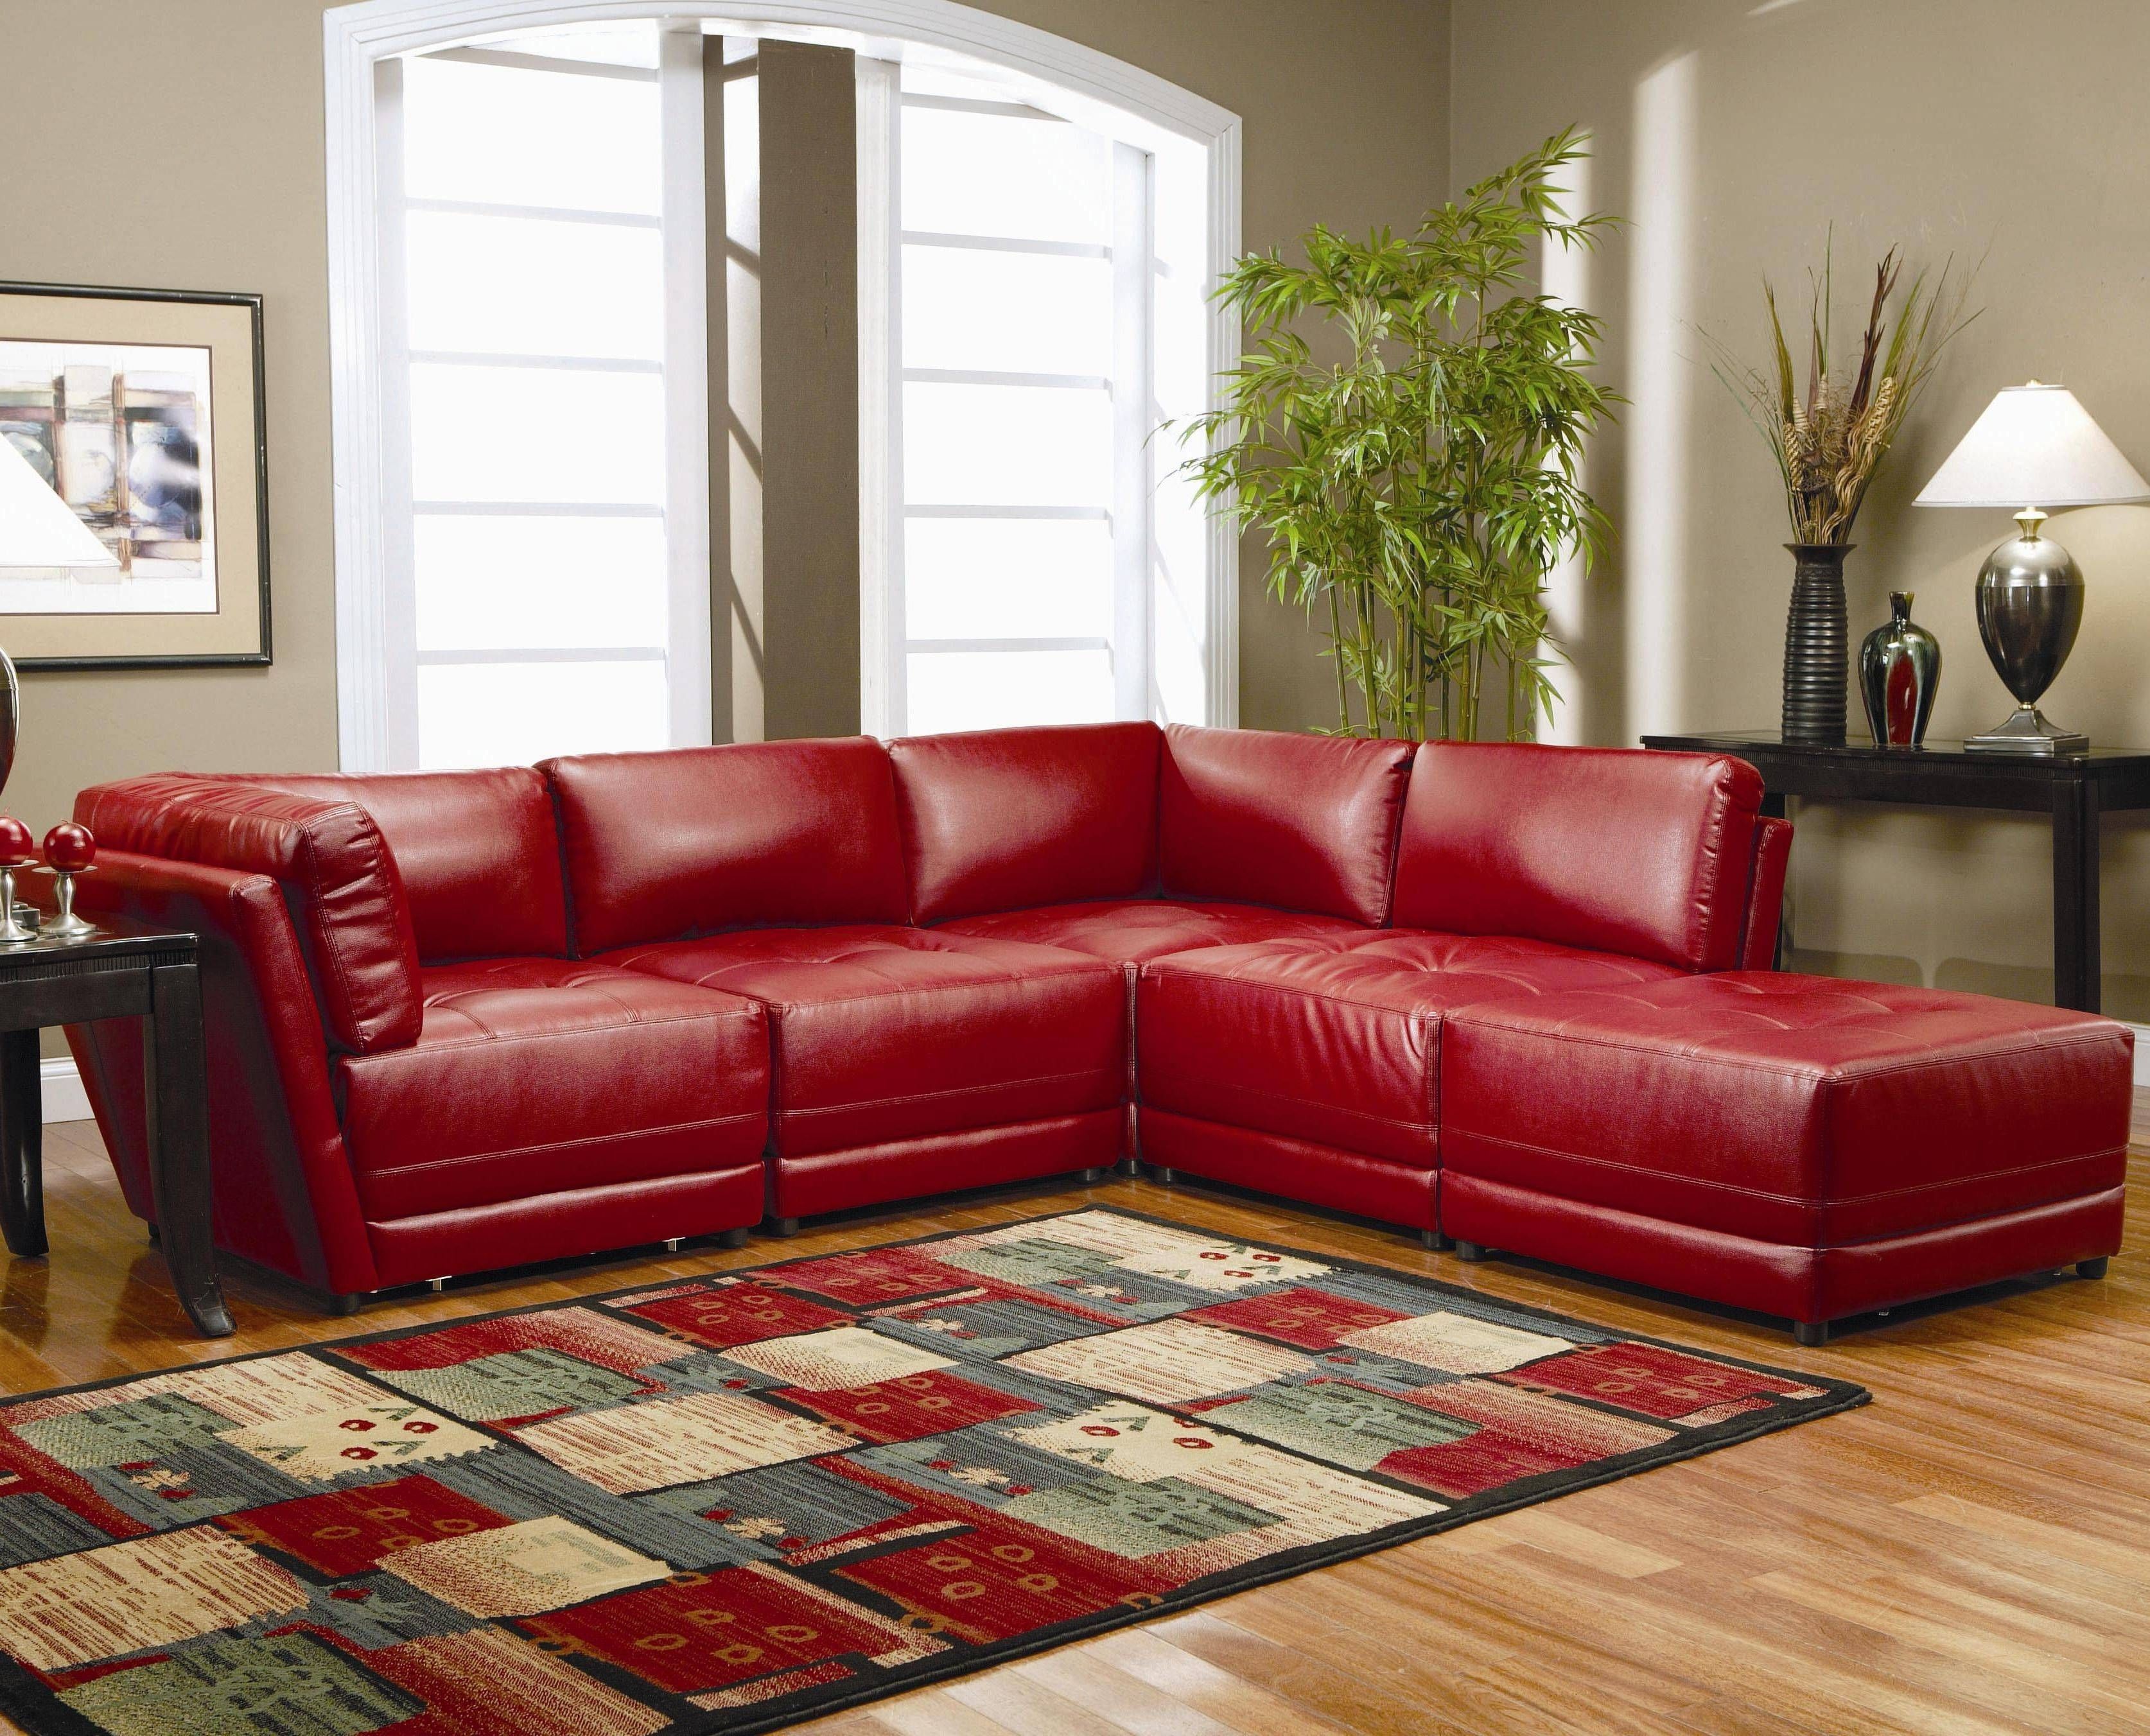 Sofas: Tan Sectional Couch | Wrap Around Couches | Red Sectional Sofa Inside Red Microfiber Sectional Sofas (View 20 of 30)